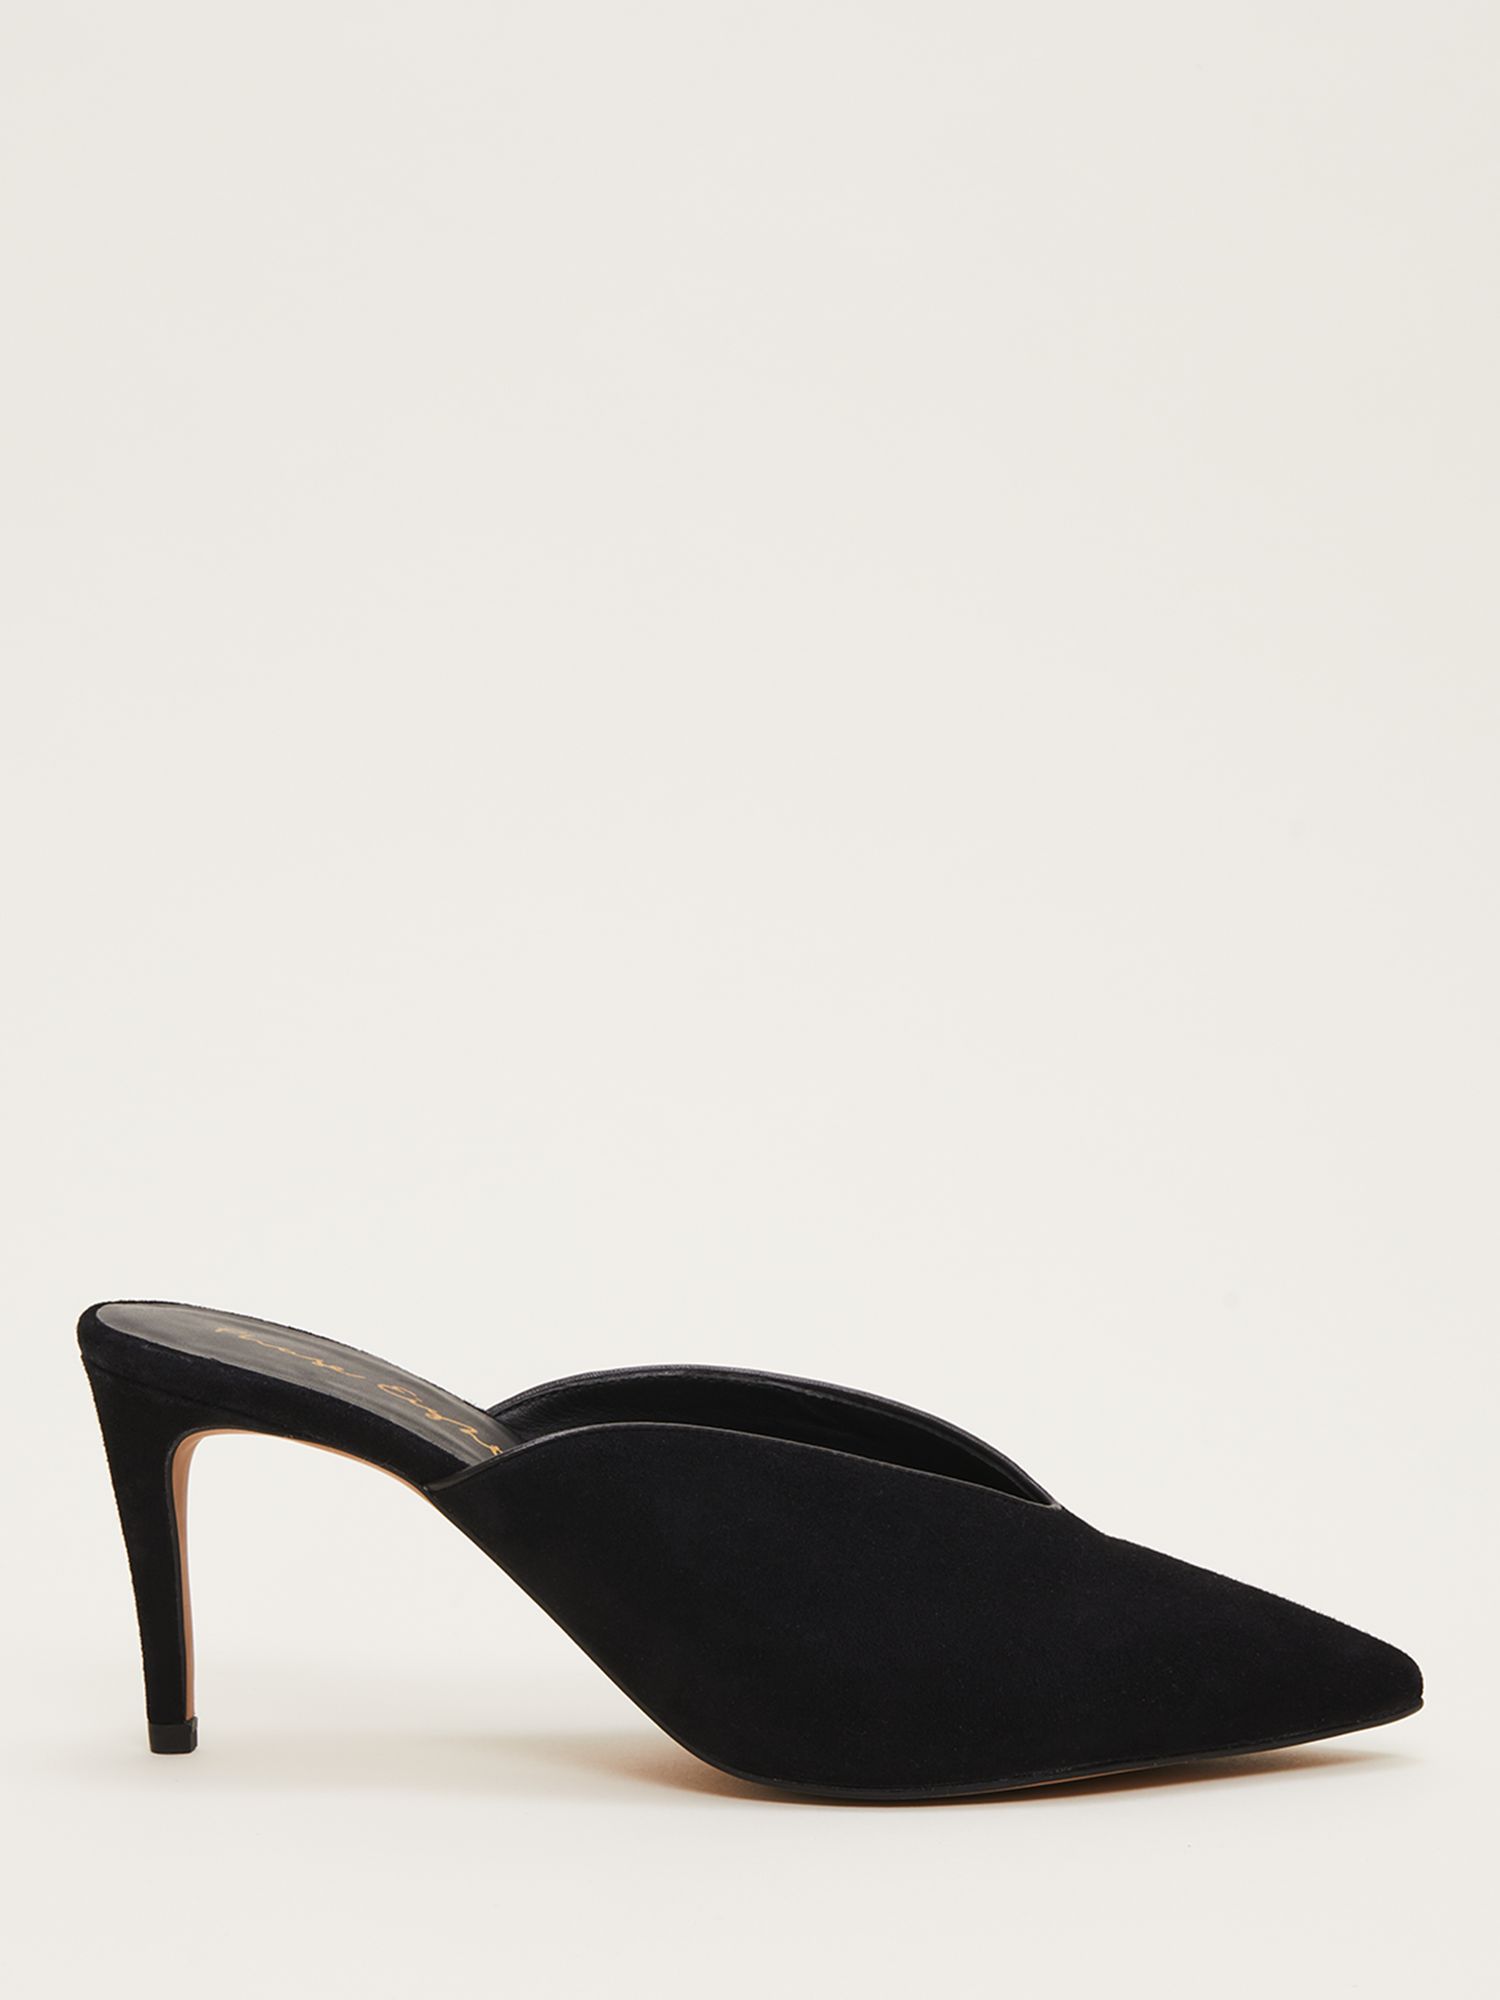 Phase Eight V Front High Heel Suede Shoes, Black at John Lewis & Partners